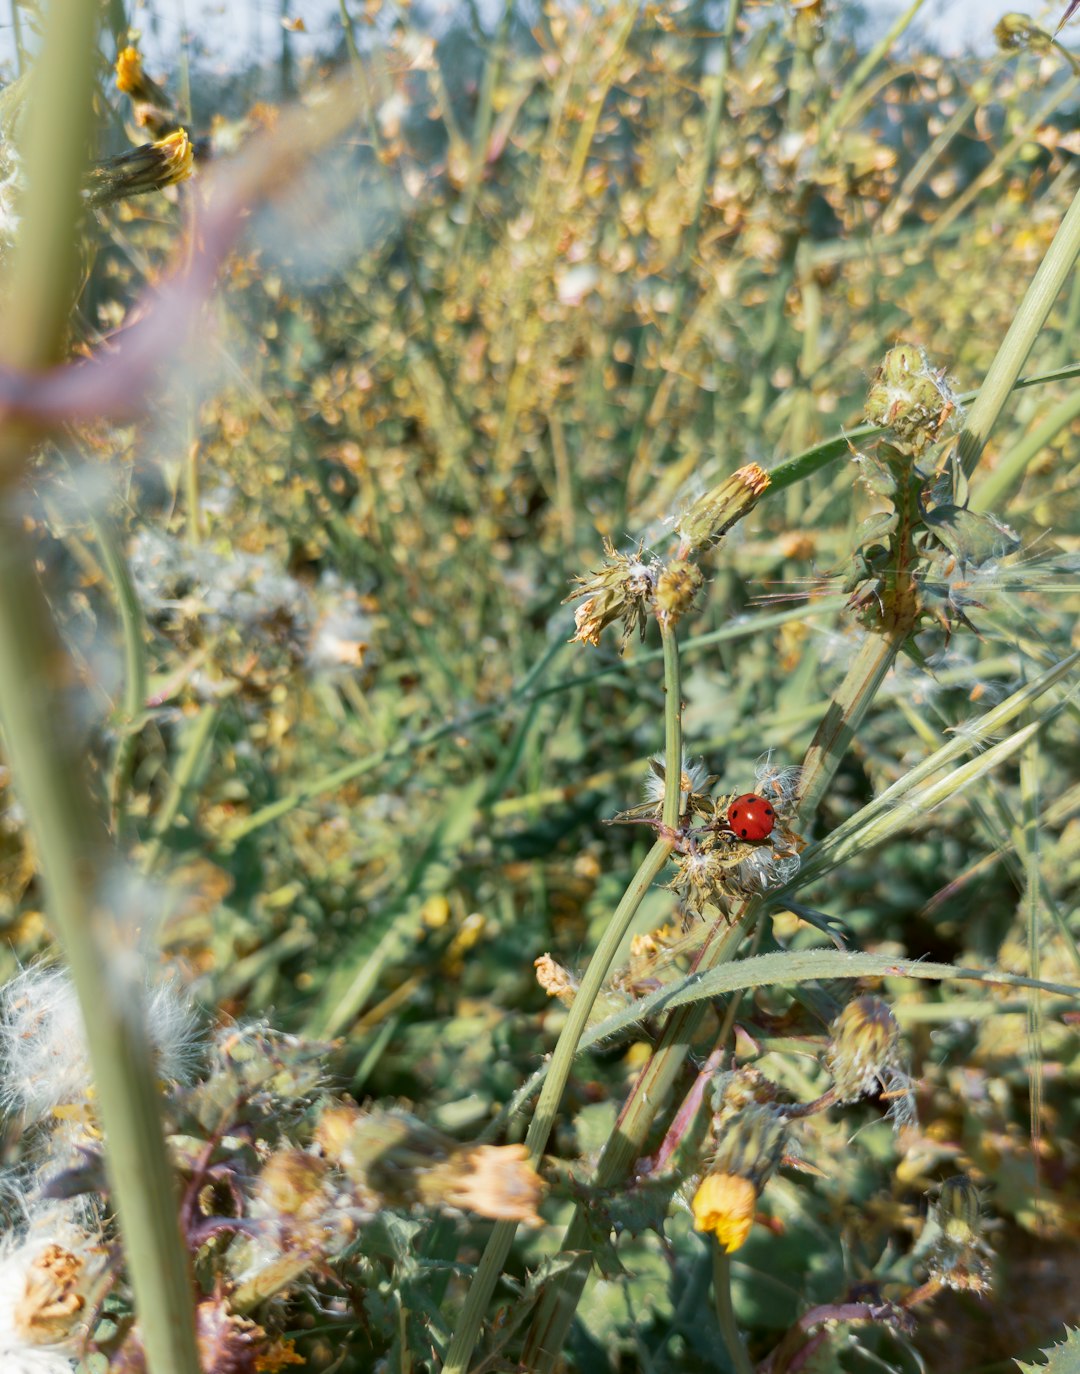 red ladybug perched on green plant during daytime